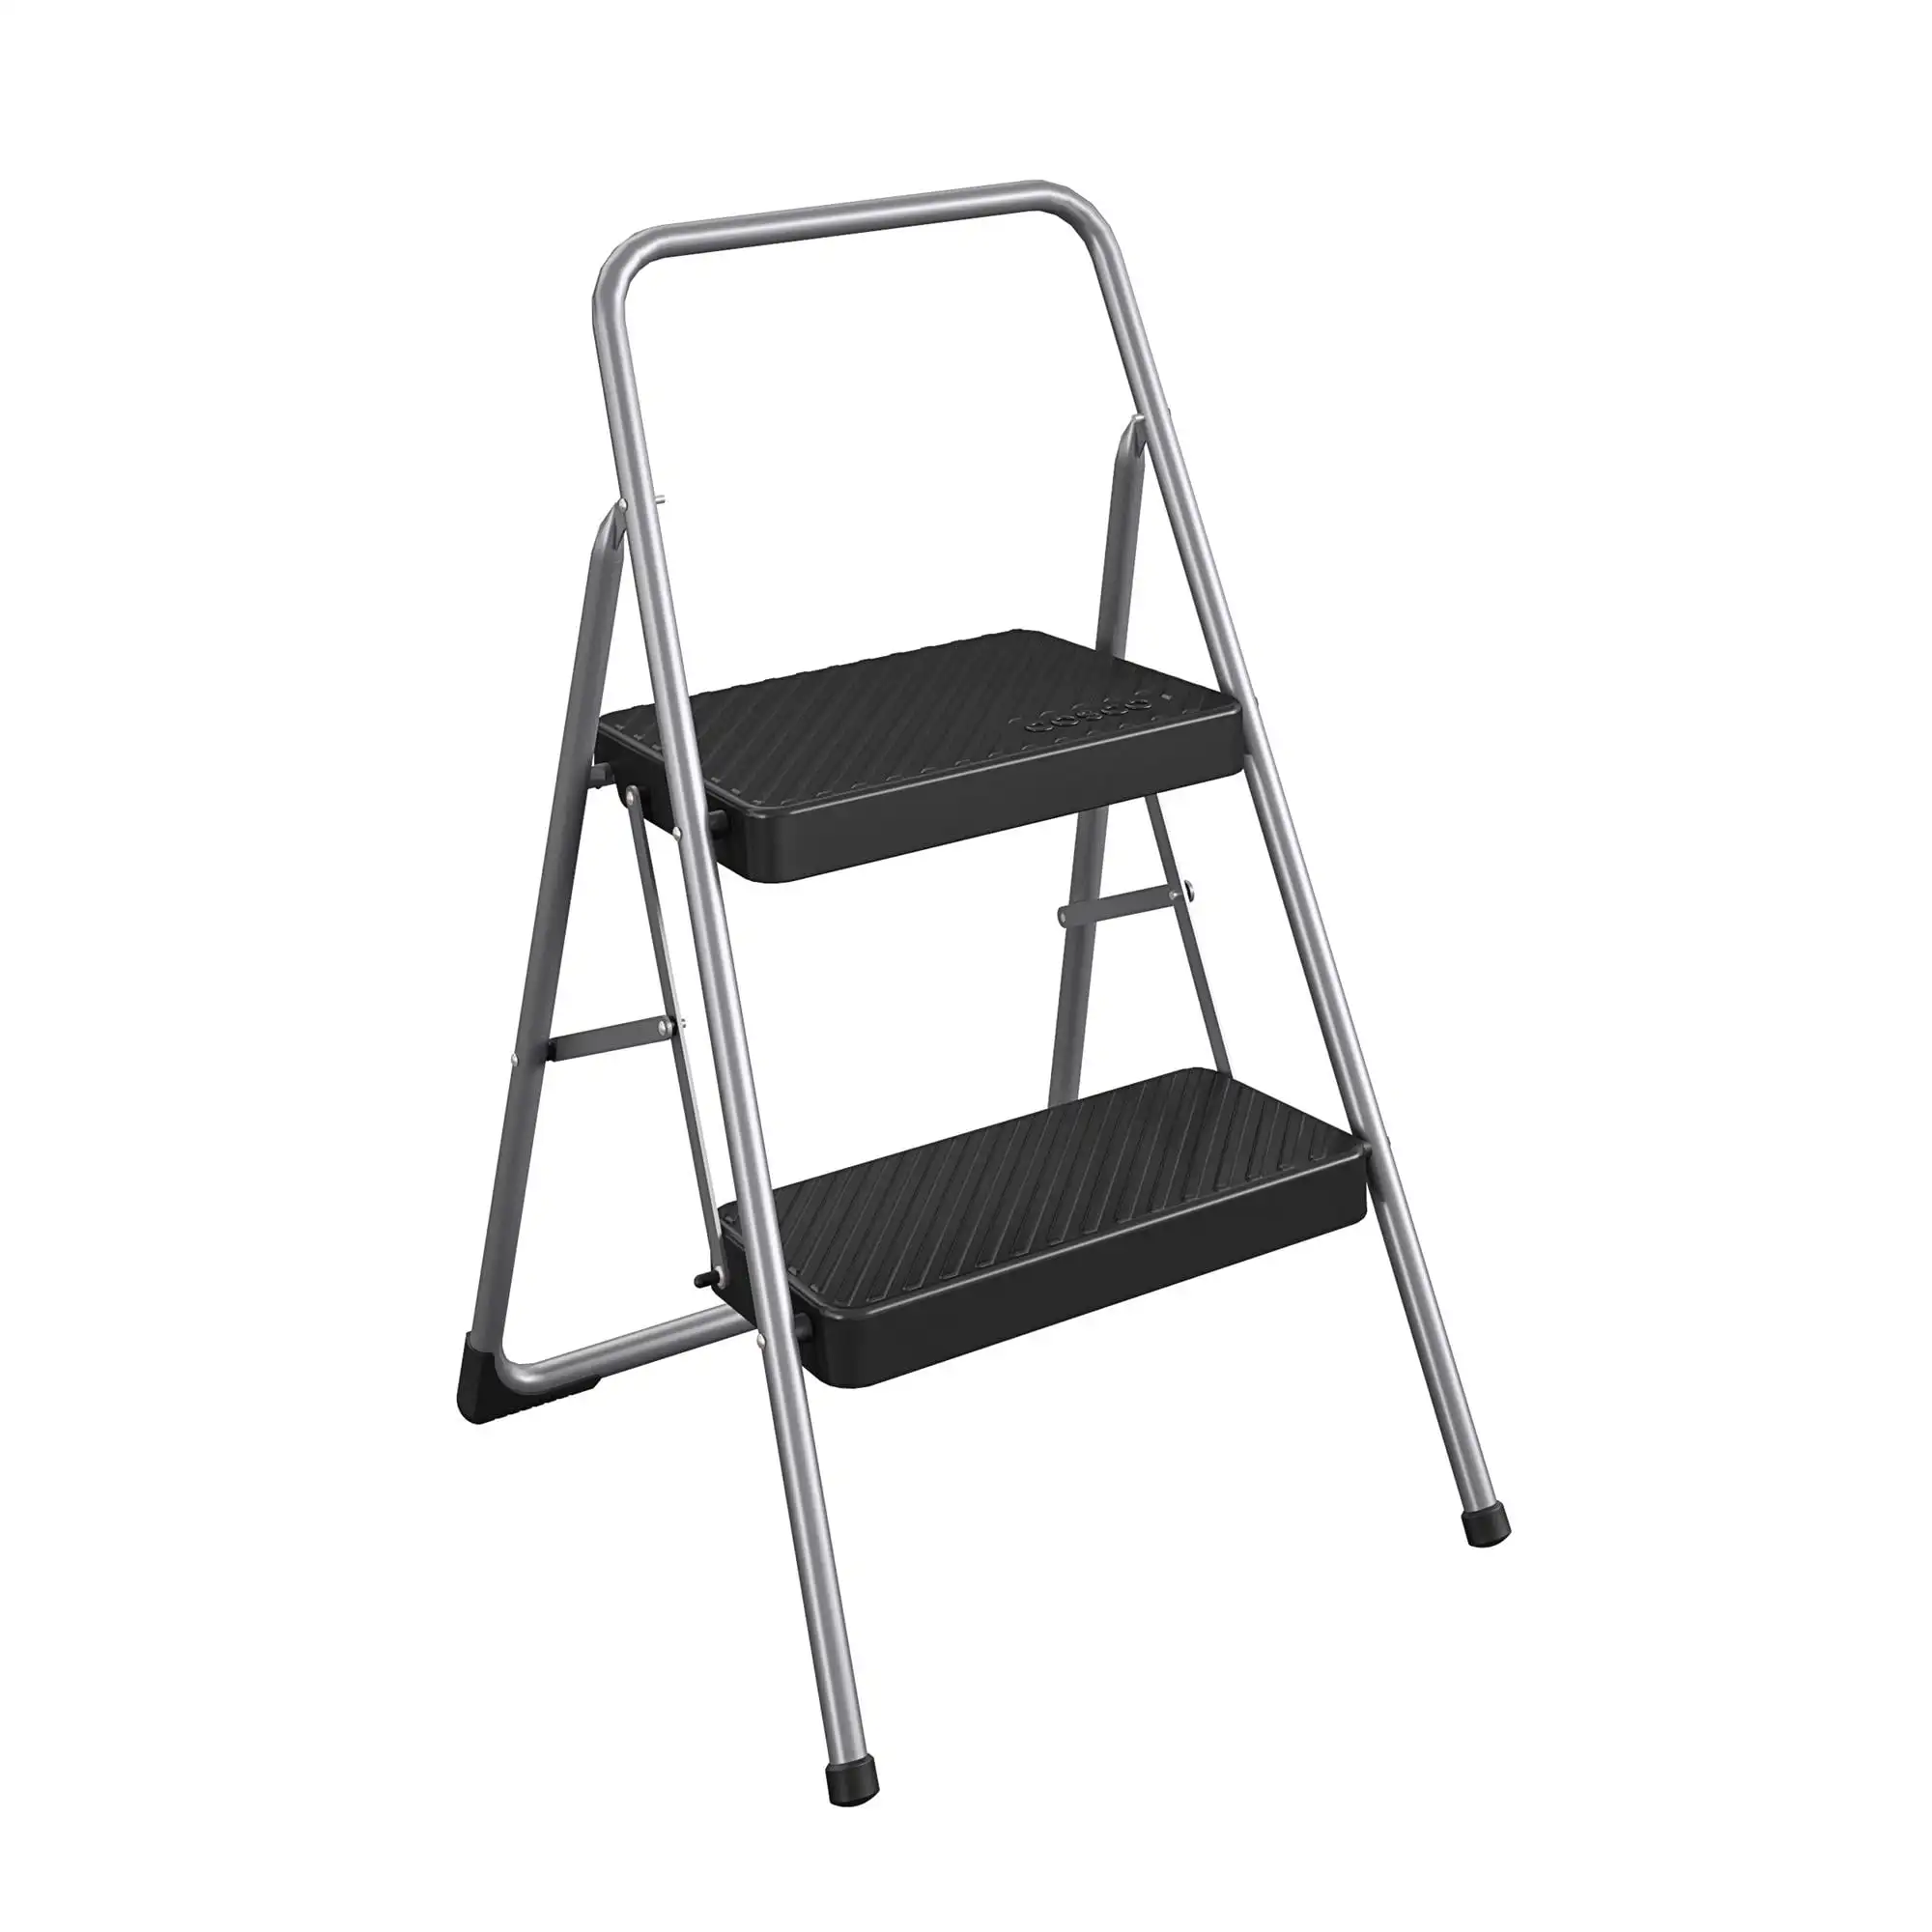 

COSCO 2-Step Household Folding Steel Step Stool ANSI Type 3 200 lb Weight Capacity Platinum High Load-bearing Strong Stable